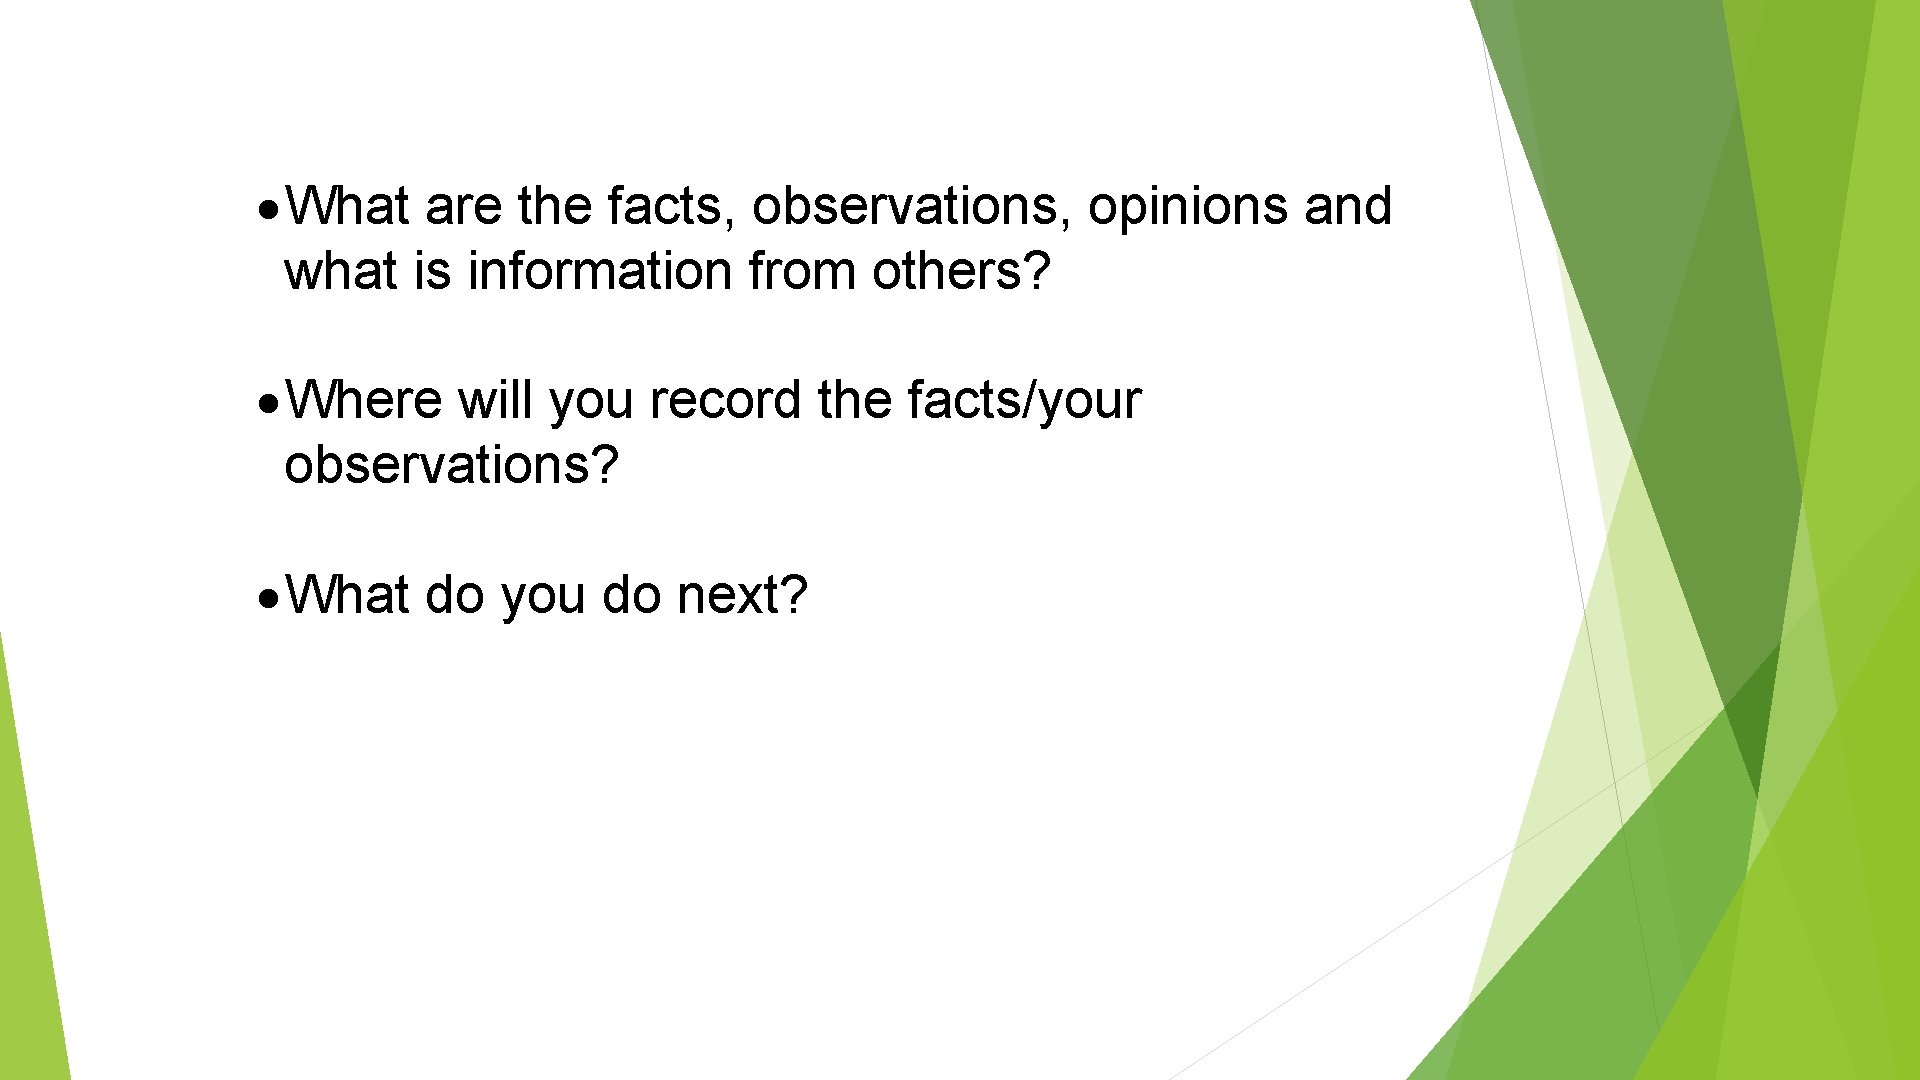  What are the facts, observations, opinions and what is information from others? Where